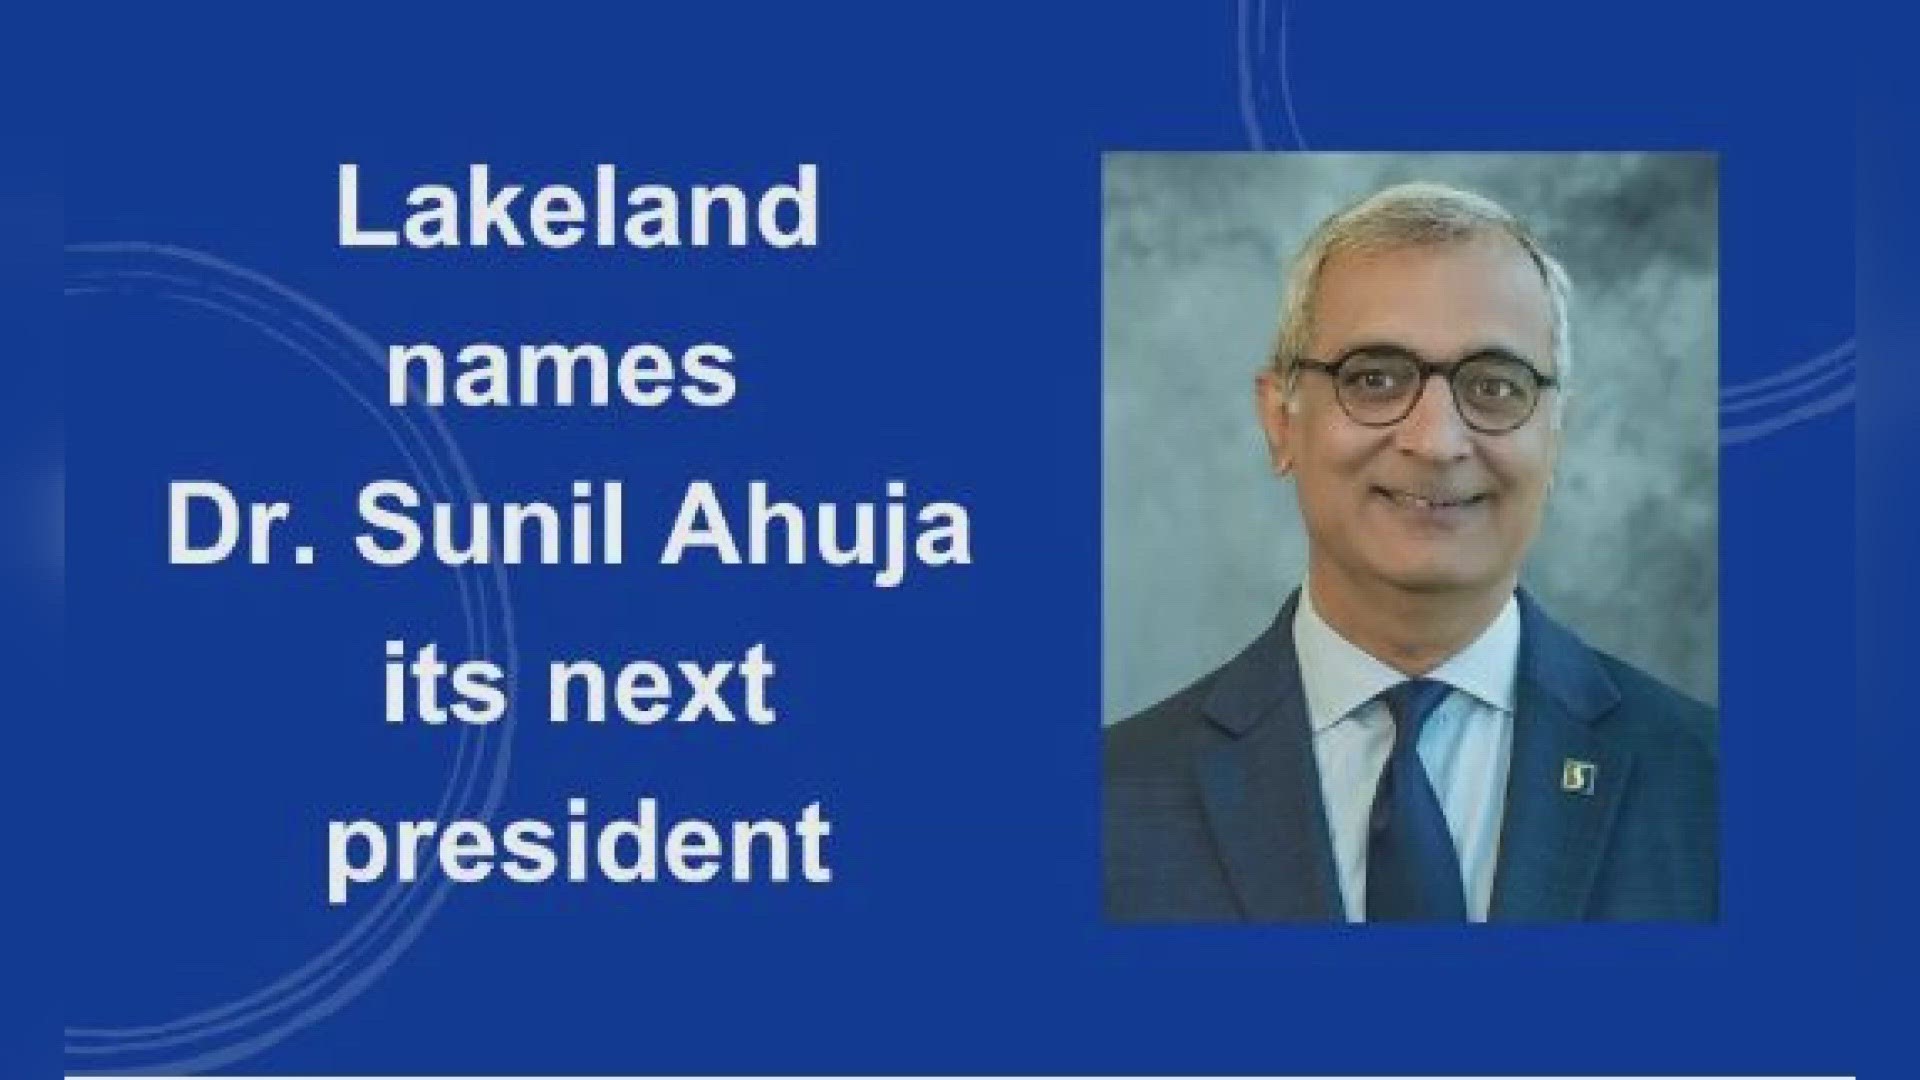 Ahuja comes to Lakeland after serving as provost and vice president of Shawnee State University in Portsmouth, Ohio. He replaces the retiring Dr. Morris Beverage.